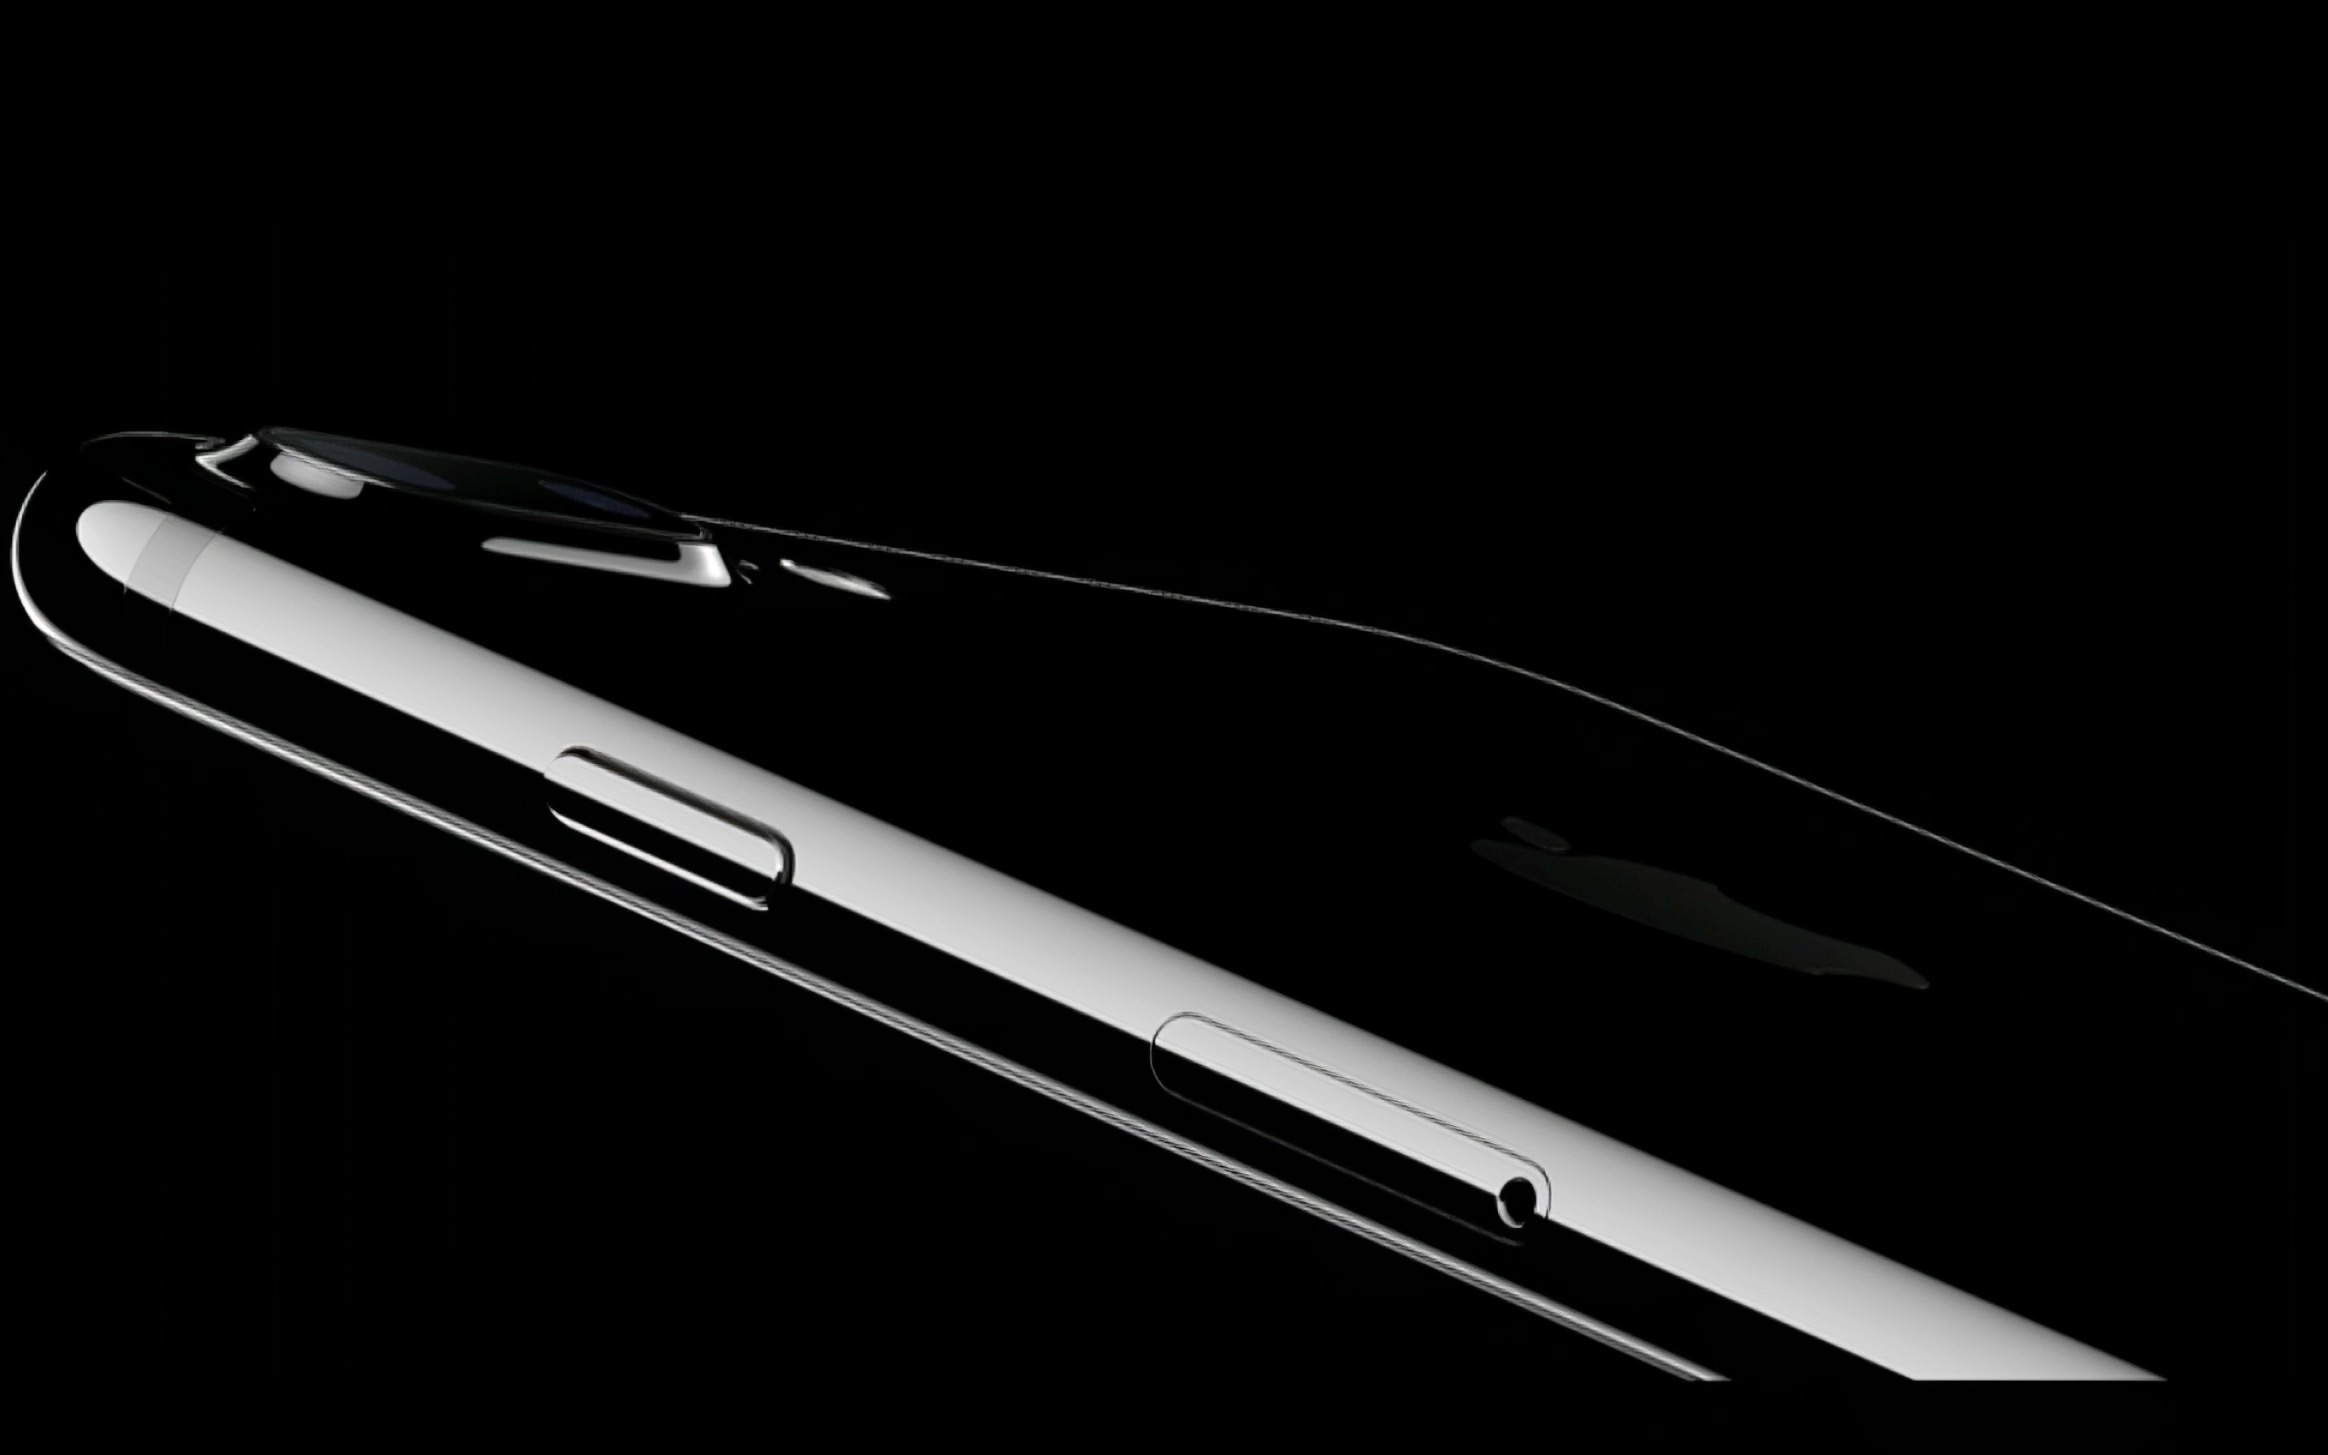 【4K重制 中文字幕】苹果iPhone 7, 7P, AirPods发布（Apple Special Event September 2016）